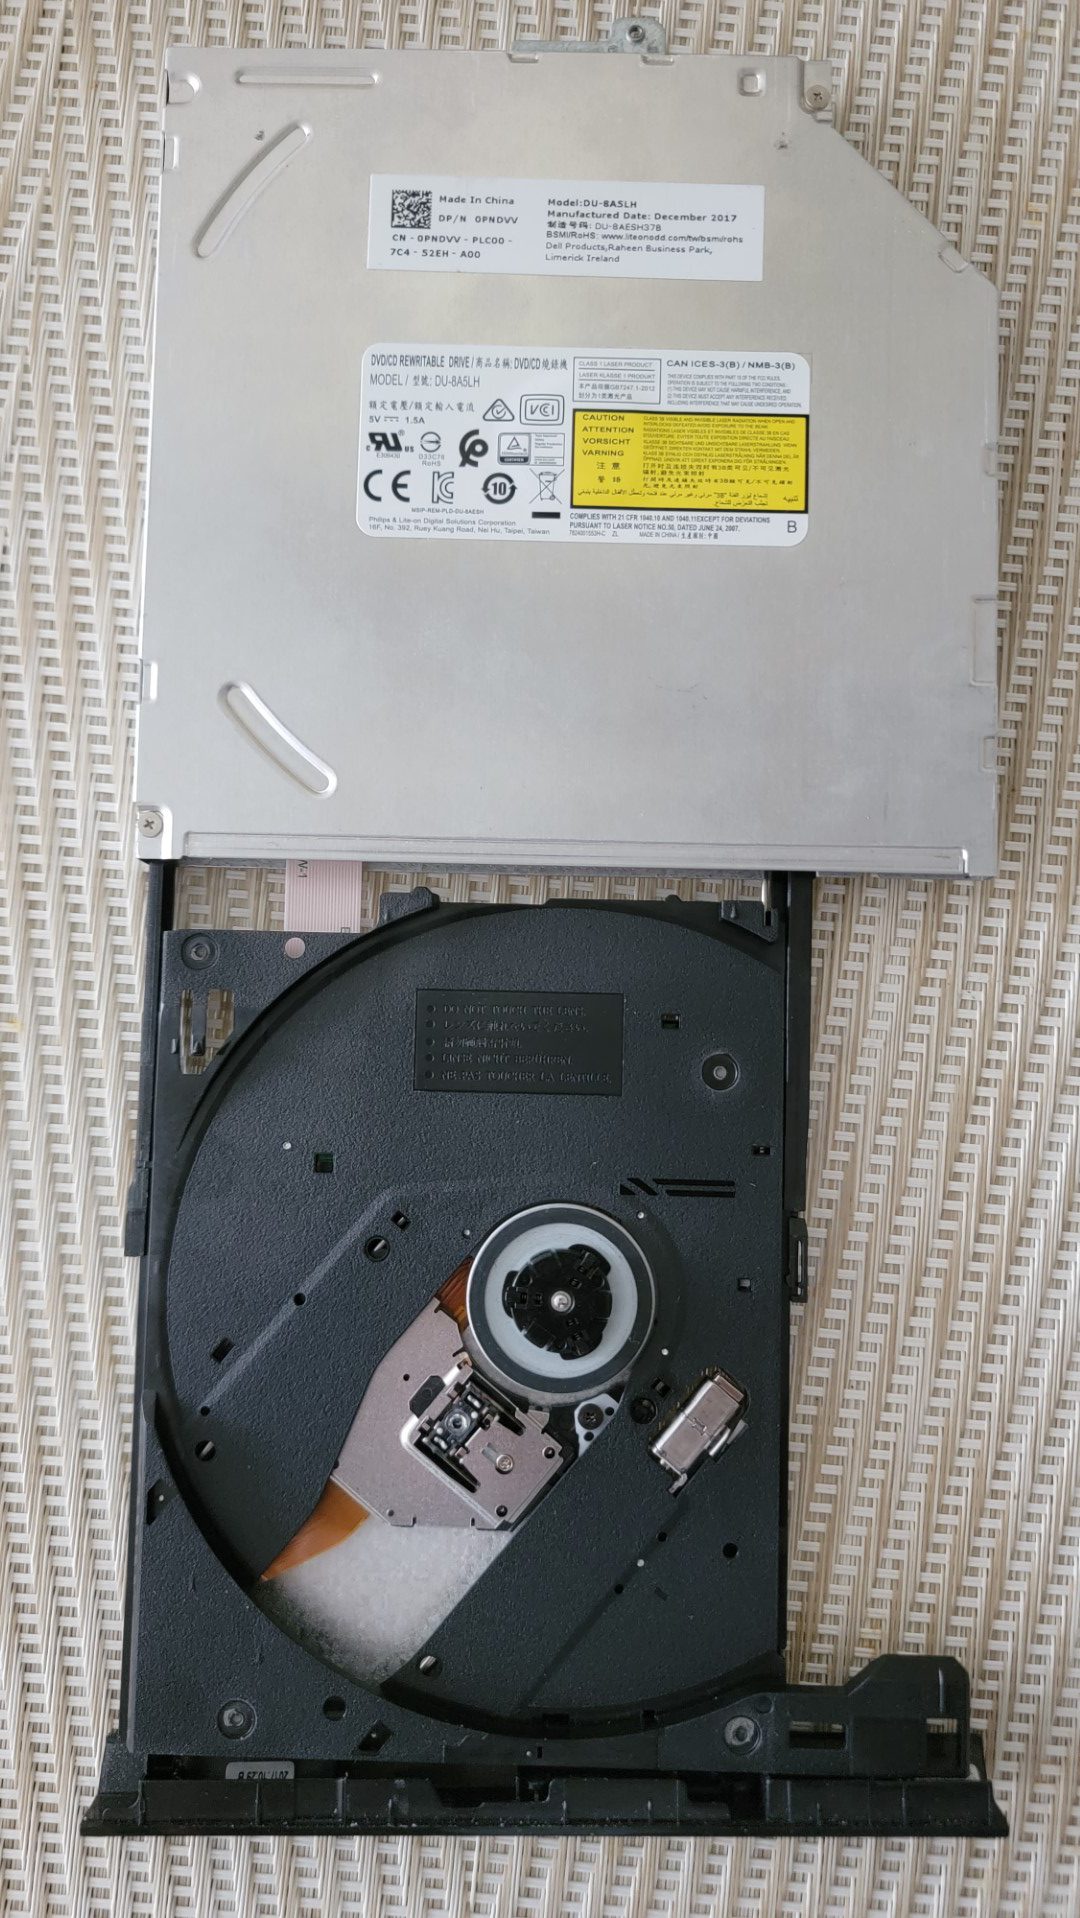 The LiteOn (PLDS) DU-8A5LH Optical Drive with its tray opened.